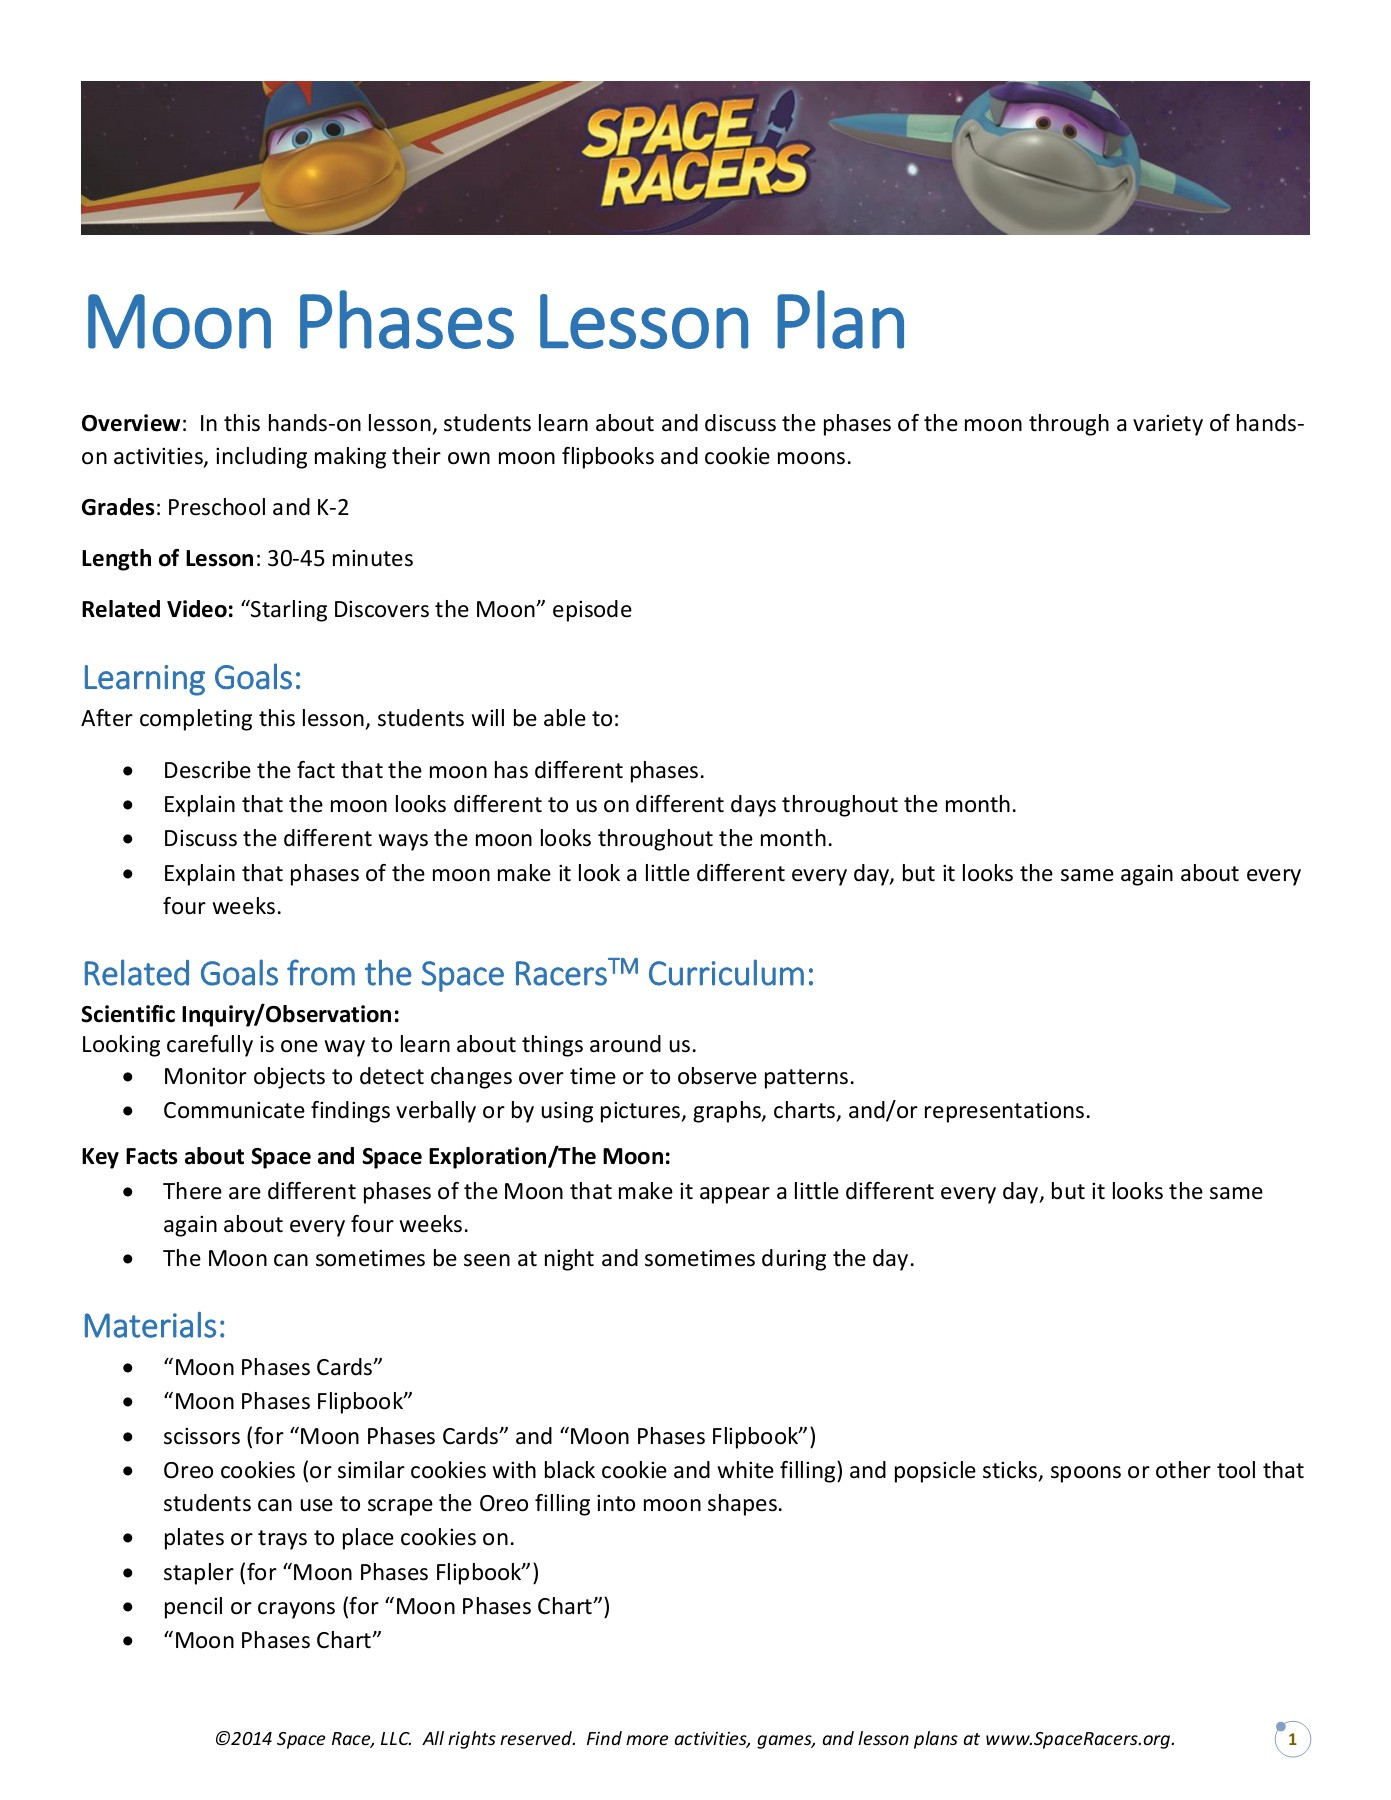 Moon Phases Lesson Plan - Space Racers Pages 1 - 6 - Text